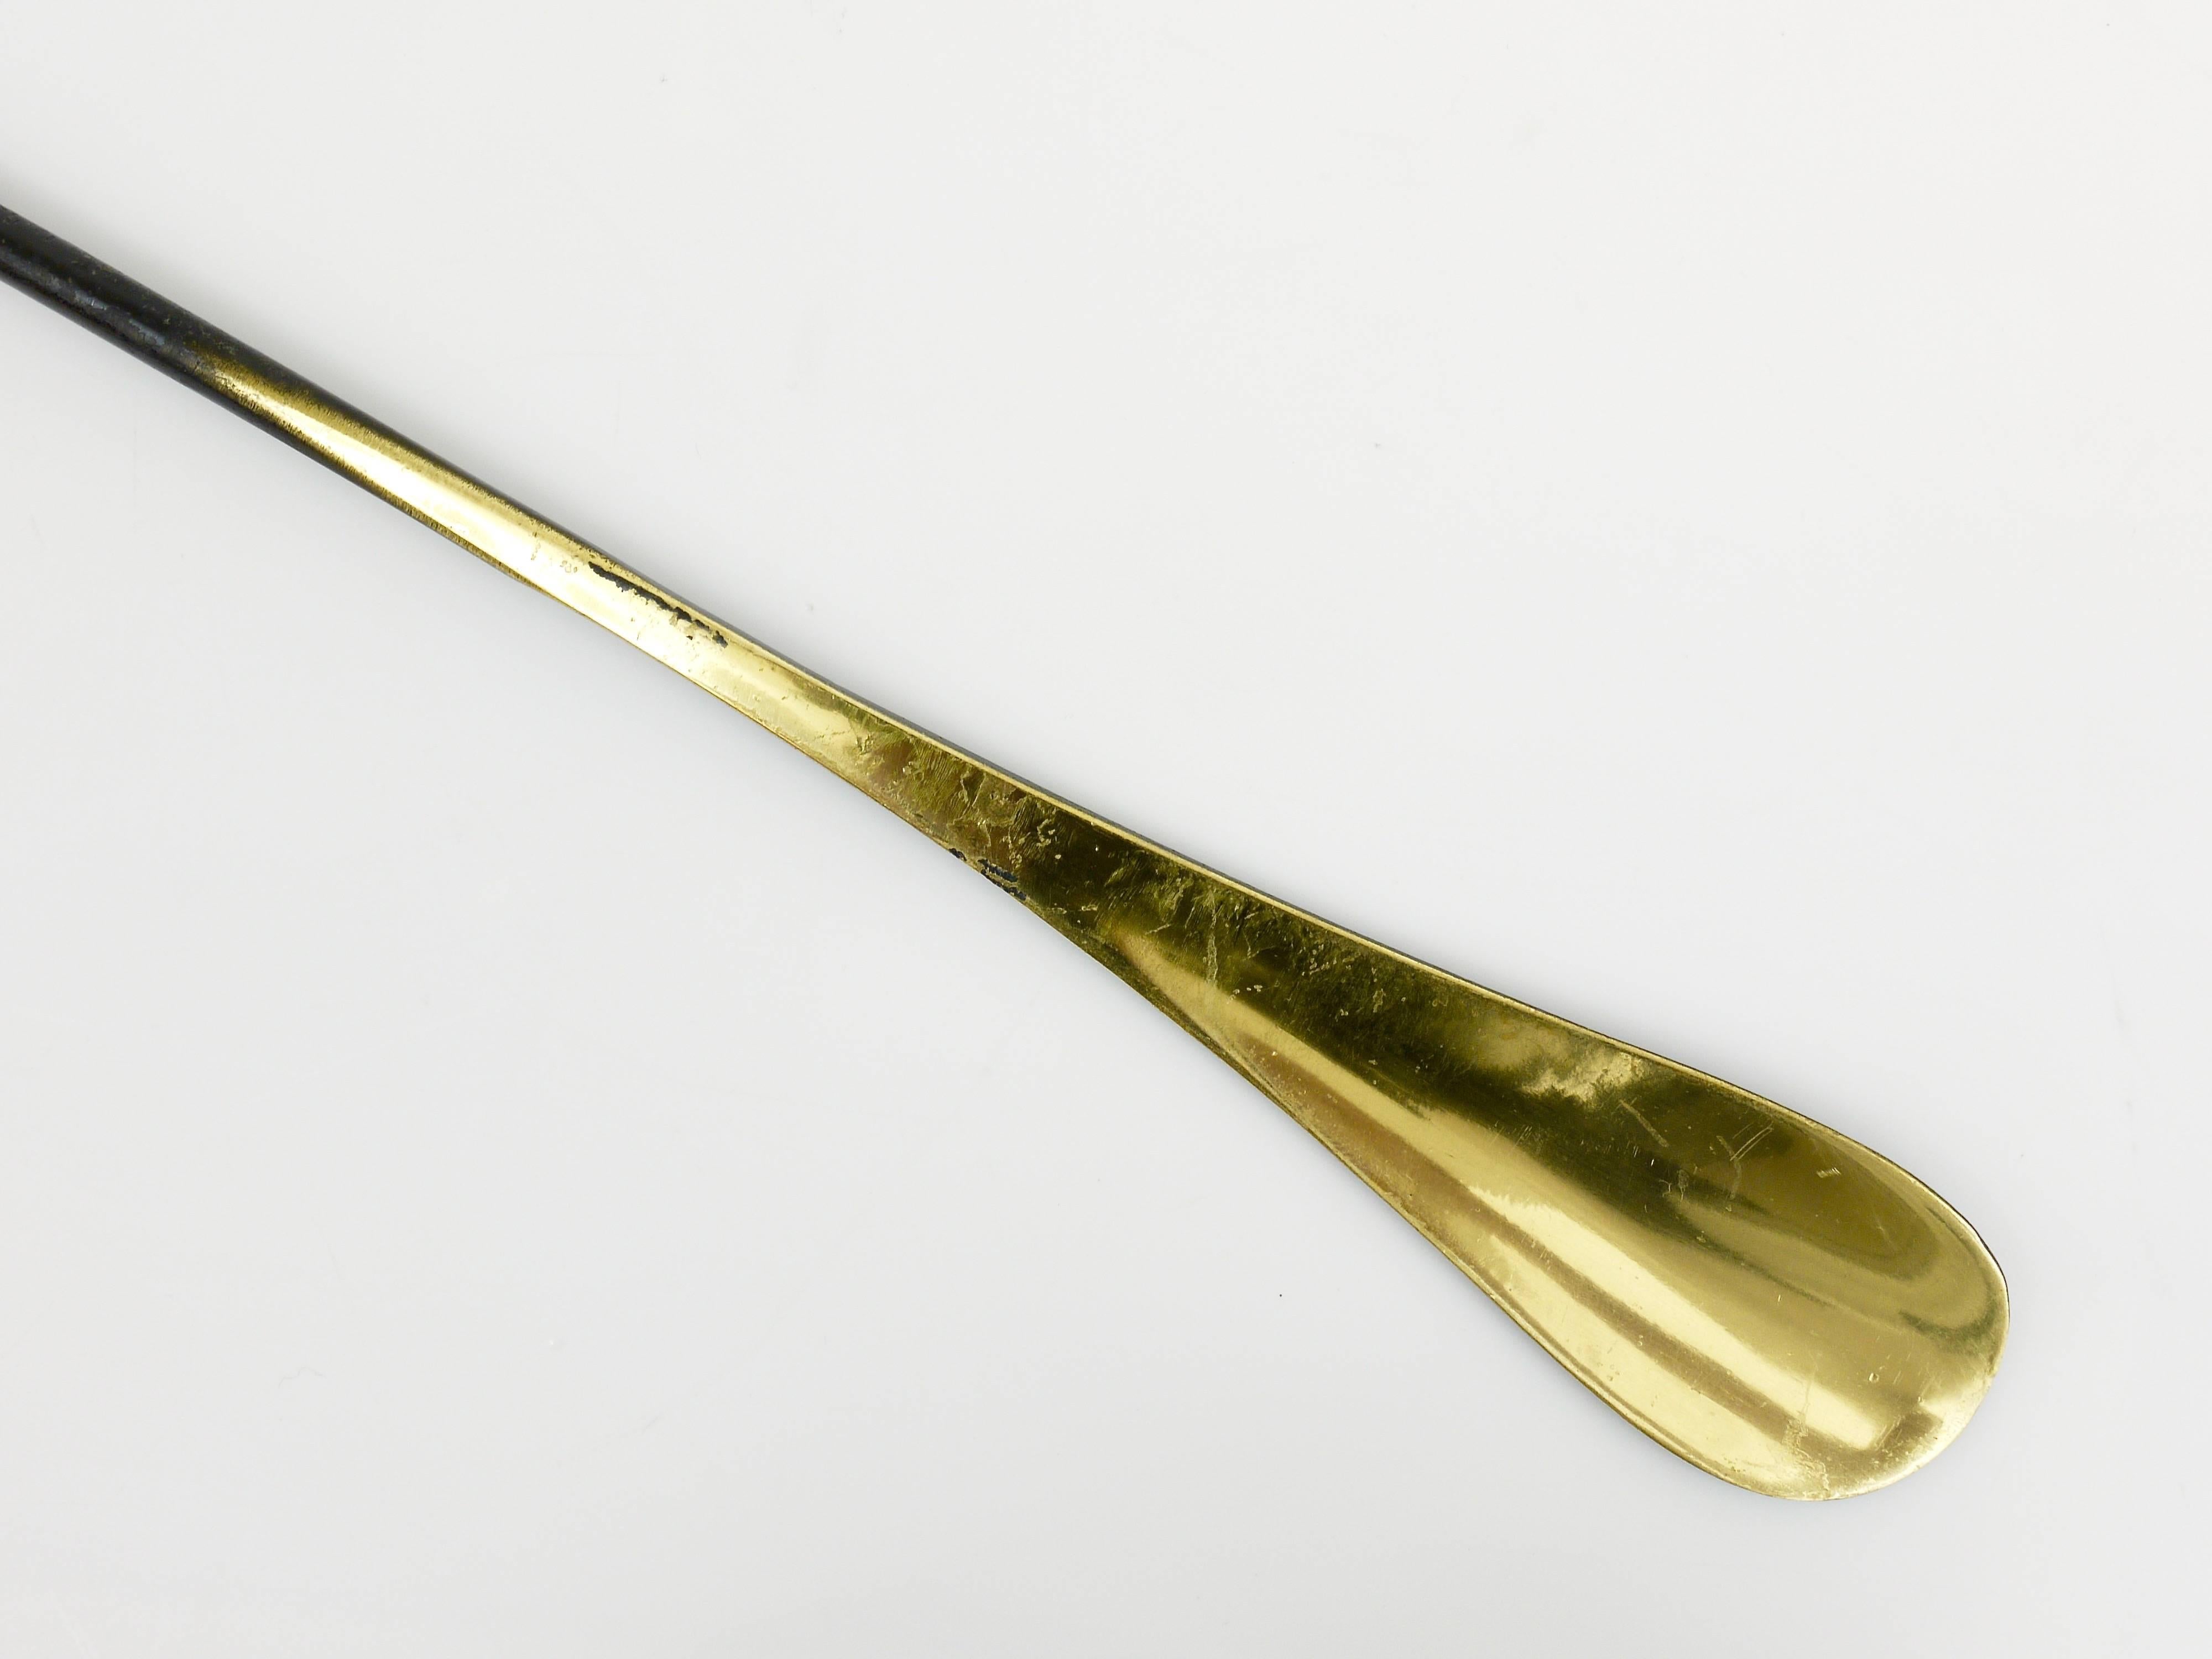 A beautiful brass shoehorn, displaying a cow. A humorous design by Walter Bosse, executed by Hertha Baller Austria in the 1950s. In very good condition with nice patina.